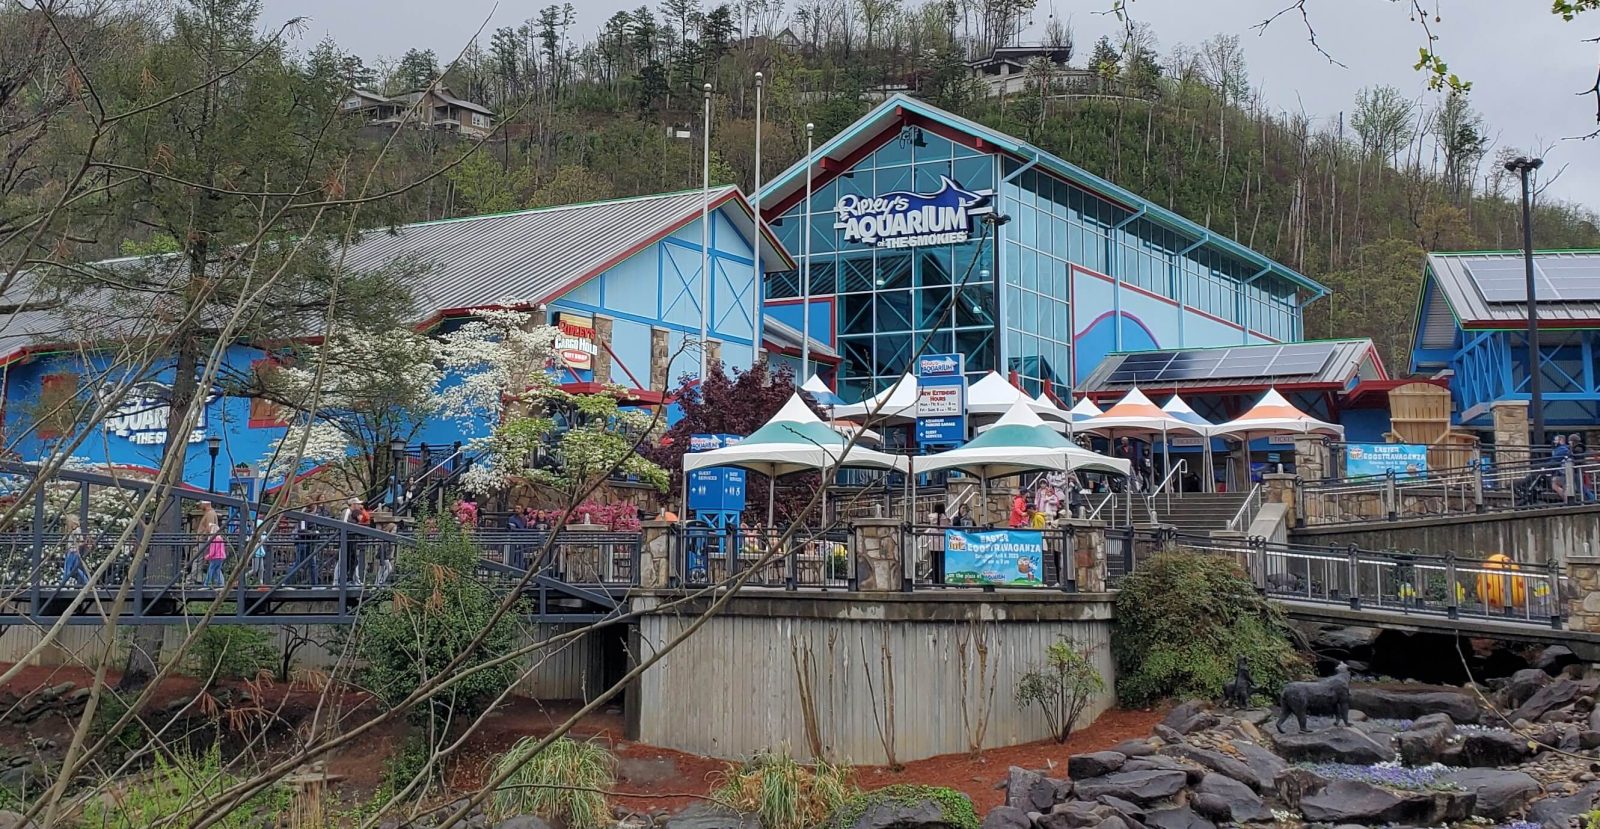 what is there to do at the Gatlinburg Aquarium?